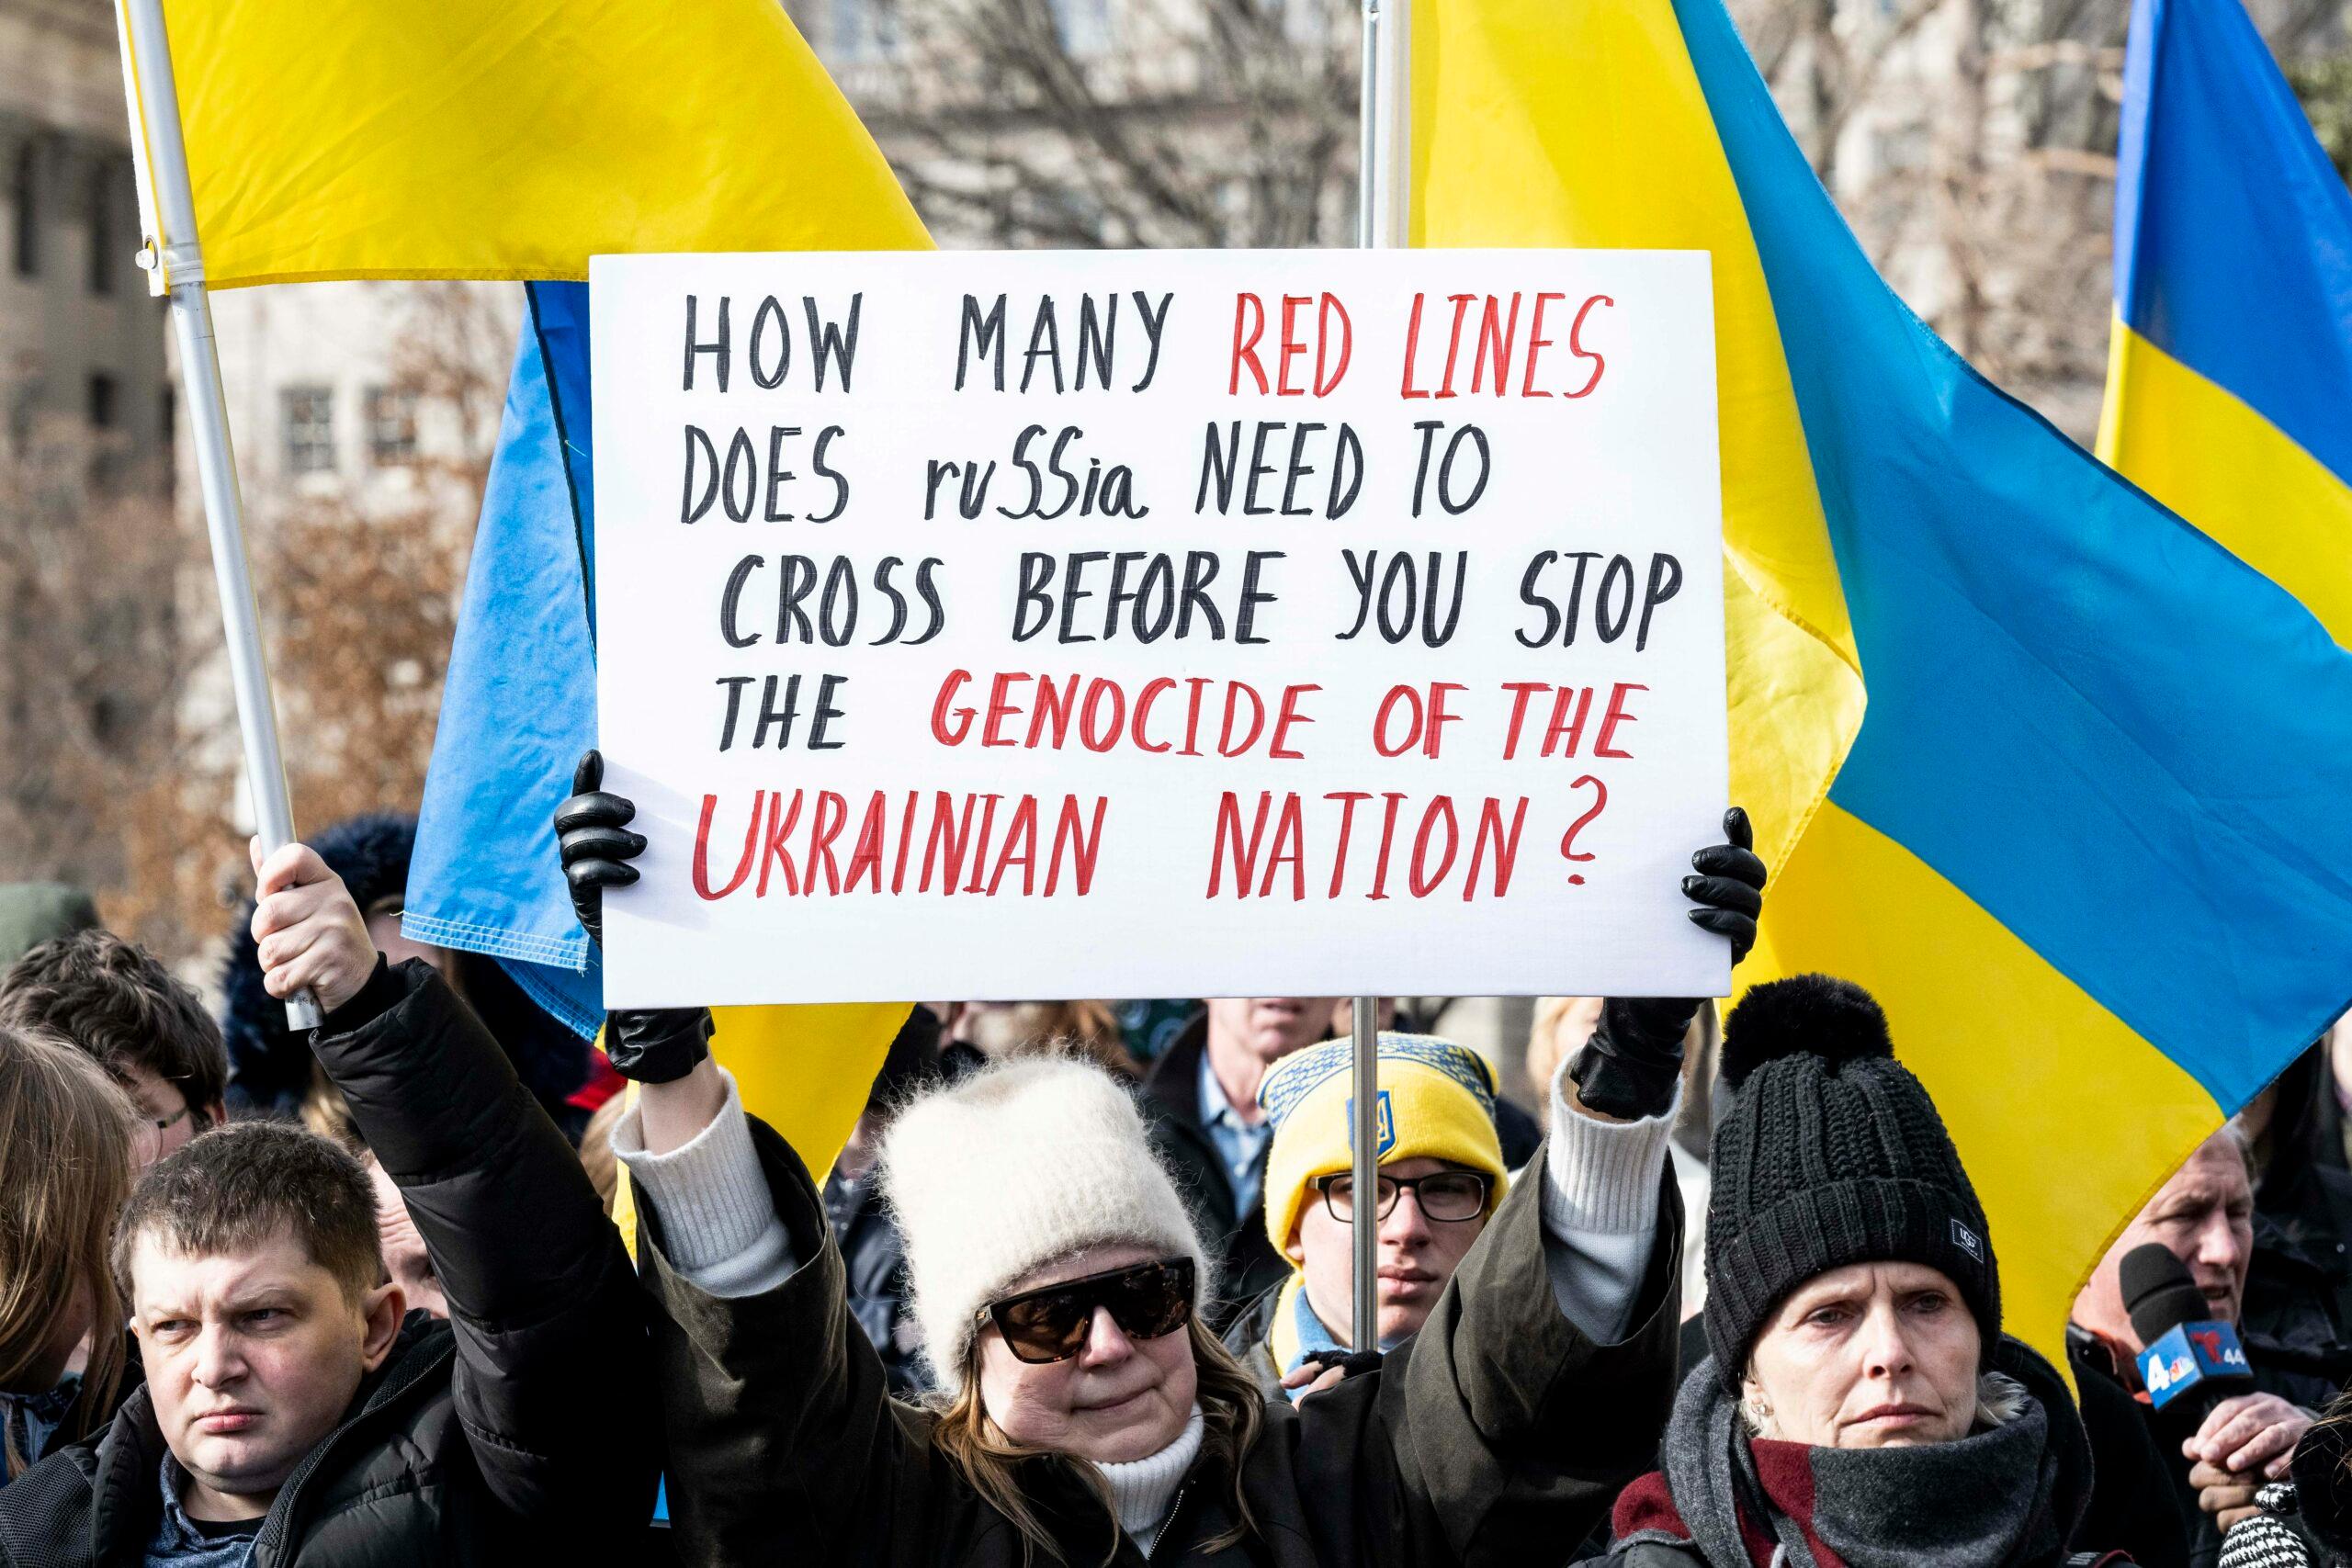 Washington, DC, United States: Ukrainian flags at a rally in front of the White House in support of Ukraine. 13 Mar 2022 Pictured: Washington, DC, United States: Woman holding a sign saying ''How many red lines does Russia need to cross before you stop the genocide of the Ukrainian nation?'' at a rally in front of the White House in support of Ukraine. Photo credit: ZUMAPRESS.com / MEGA TheMegaAgency.com +1 888 505 6342 (Mega Agency TagID: MEGA837908_003.jpg) [Photo via Mega Agency]